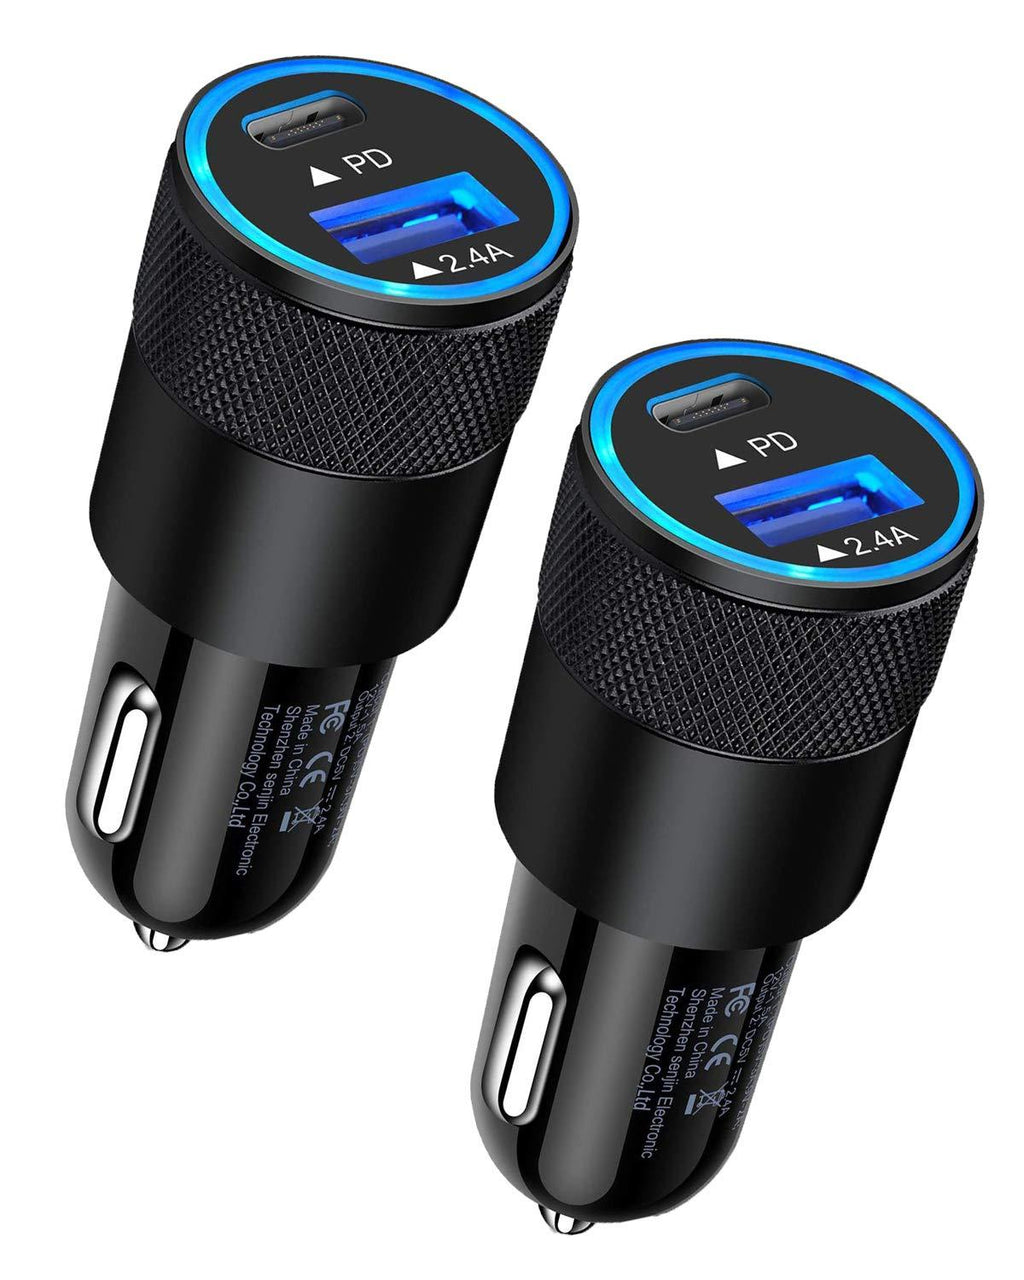 30W USB C Car Charger, [2Pack] PD 3.0 Fast Charge Dual Port USB Type C and 2.4a USB A Cargador Carro Lighter Adapter Base for iPhone, iPad, Samsung Galaxy, LG, Google Pixel GPS, Z Play Droid, Motorola Black-PD - LeoForward Australia